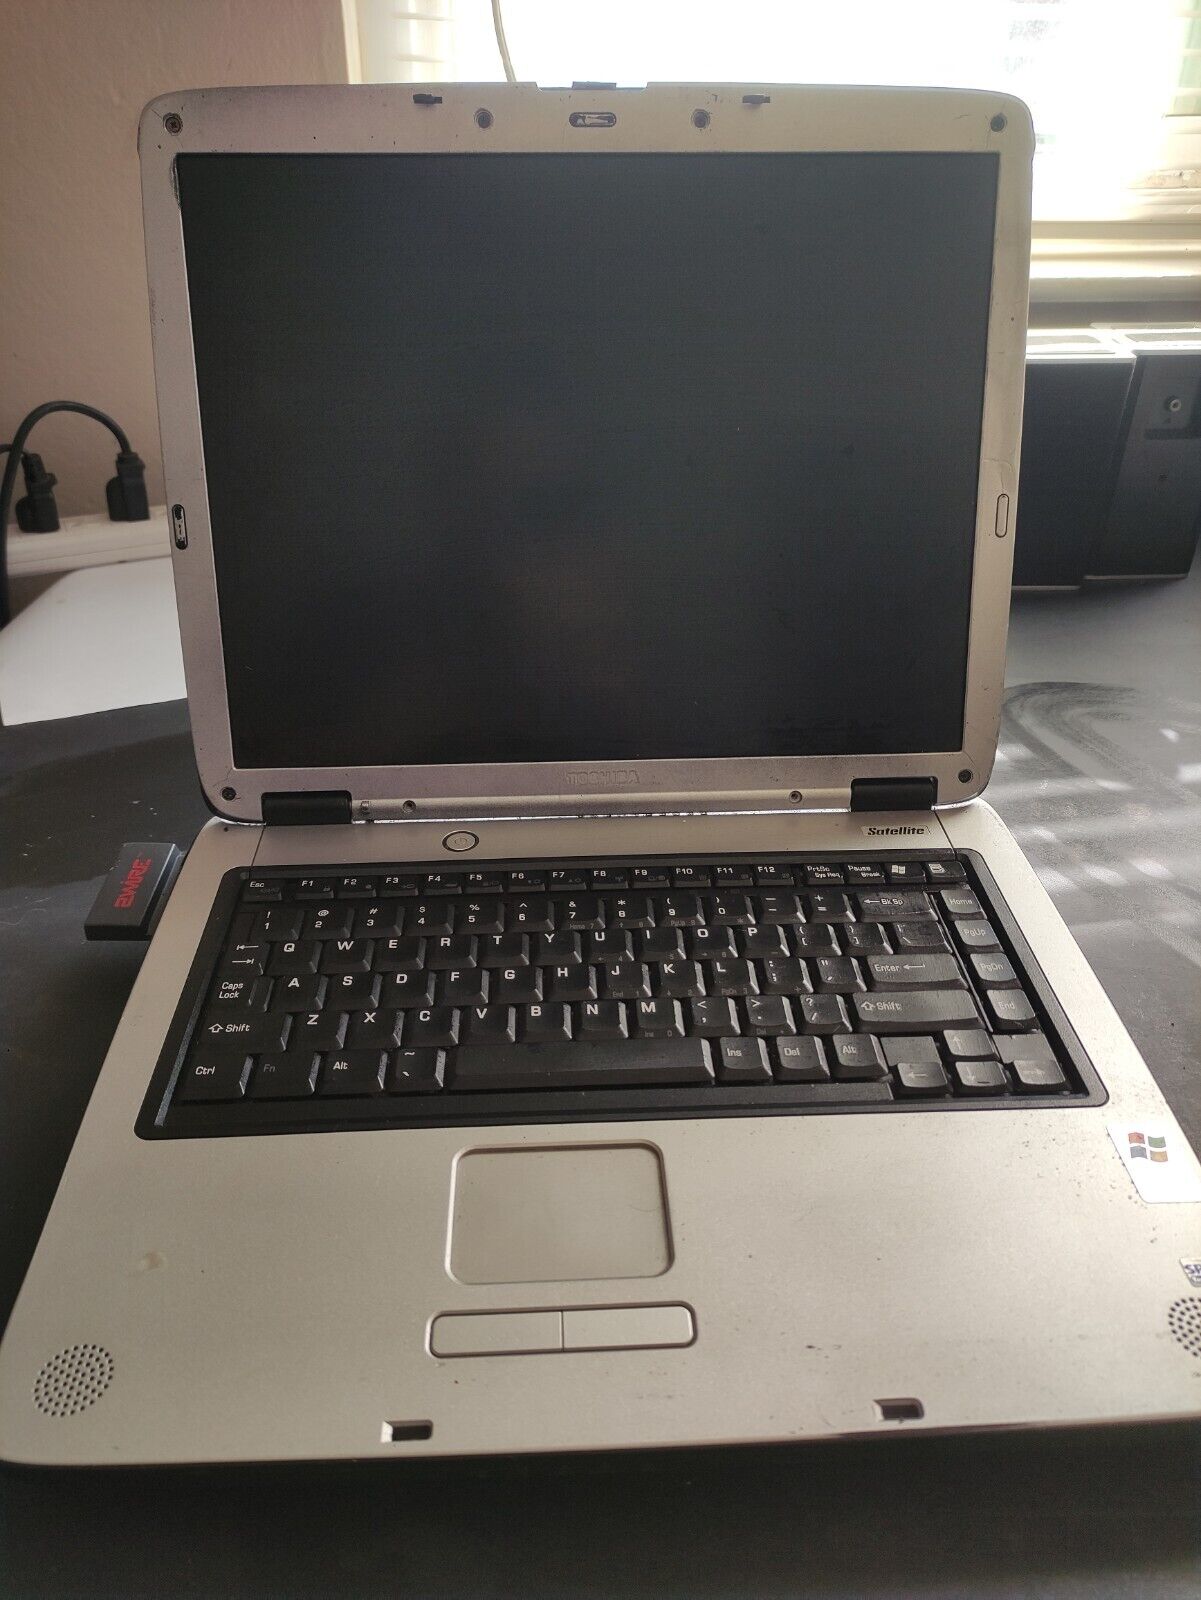 Toshiba Satellite A65-S1062 Laptop Repair No Power Cord. Complete Wi Fi